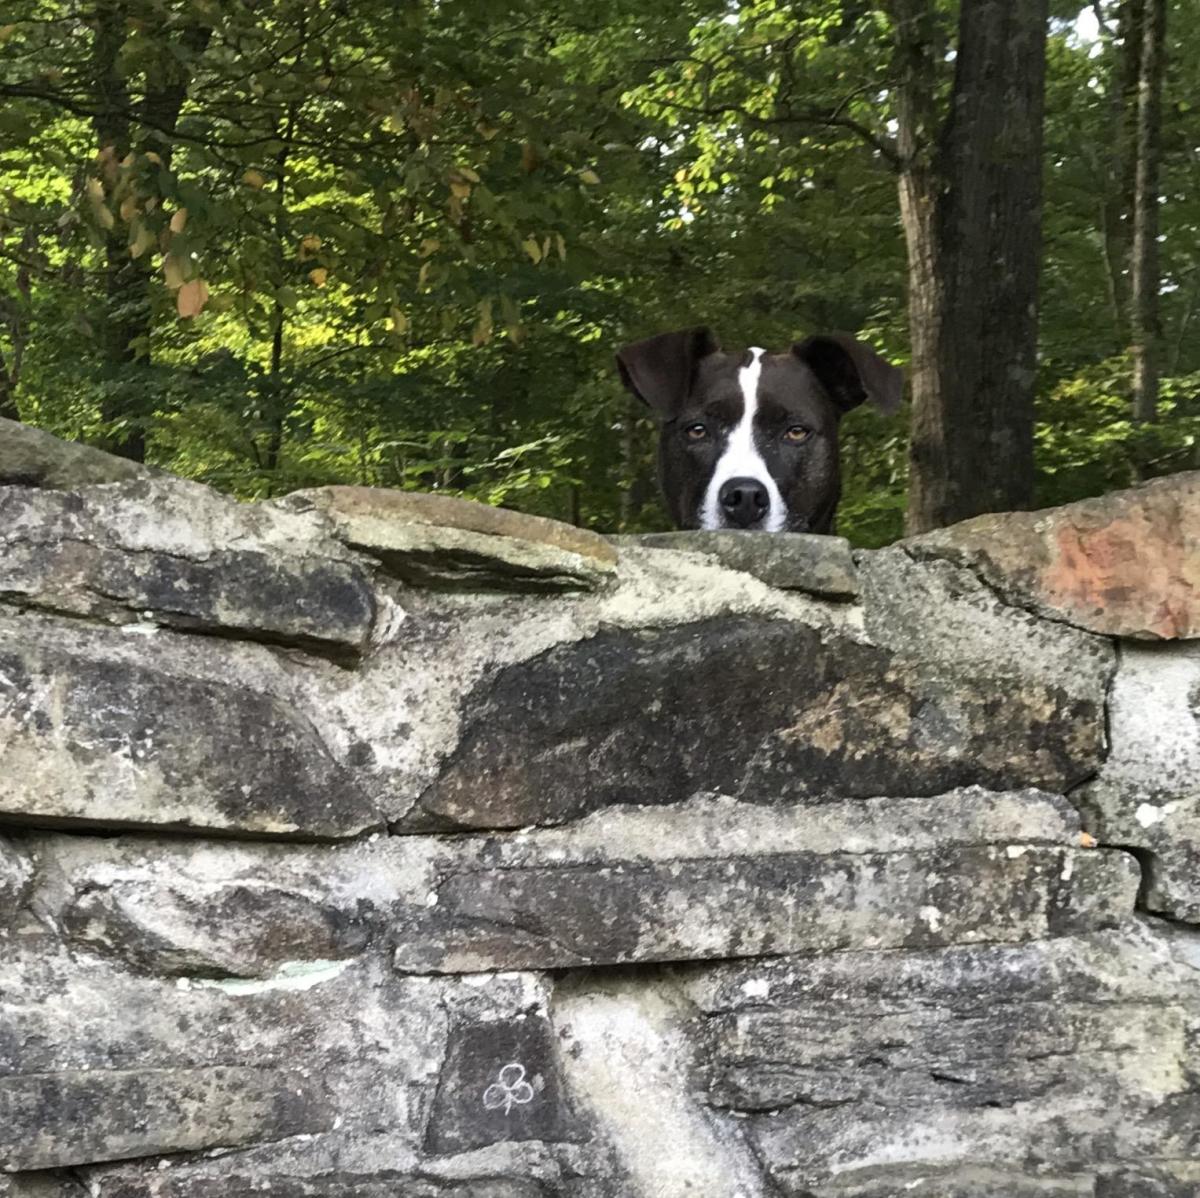 My hiking companion Versa peers over a stone wall near Clear Fork Gorge inside Mohican State Park.